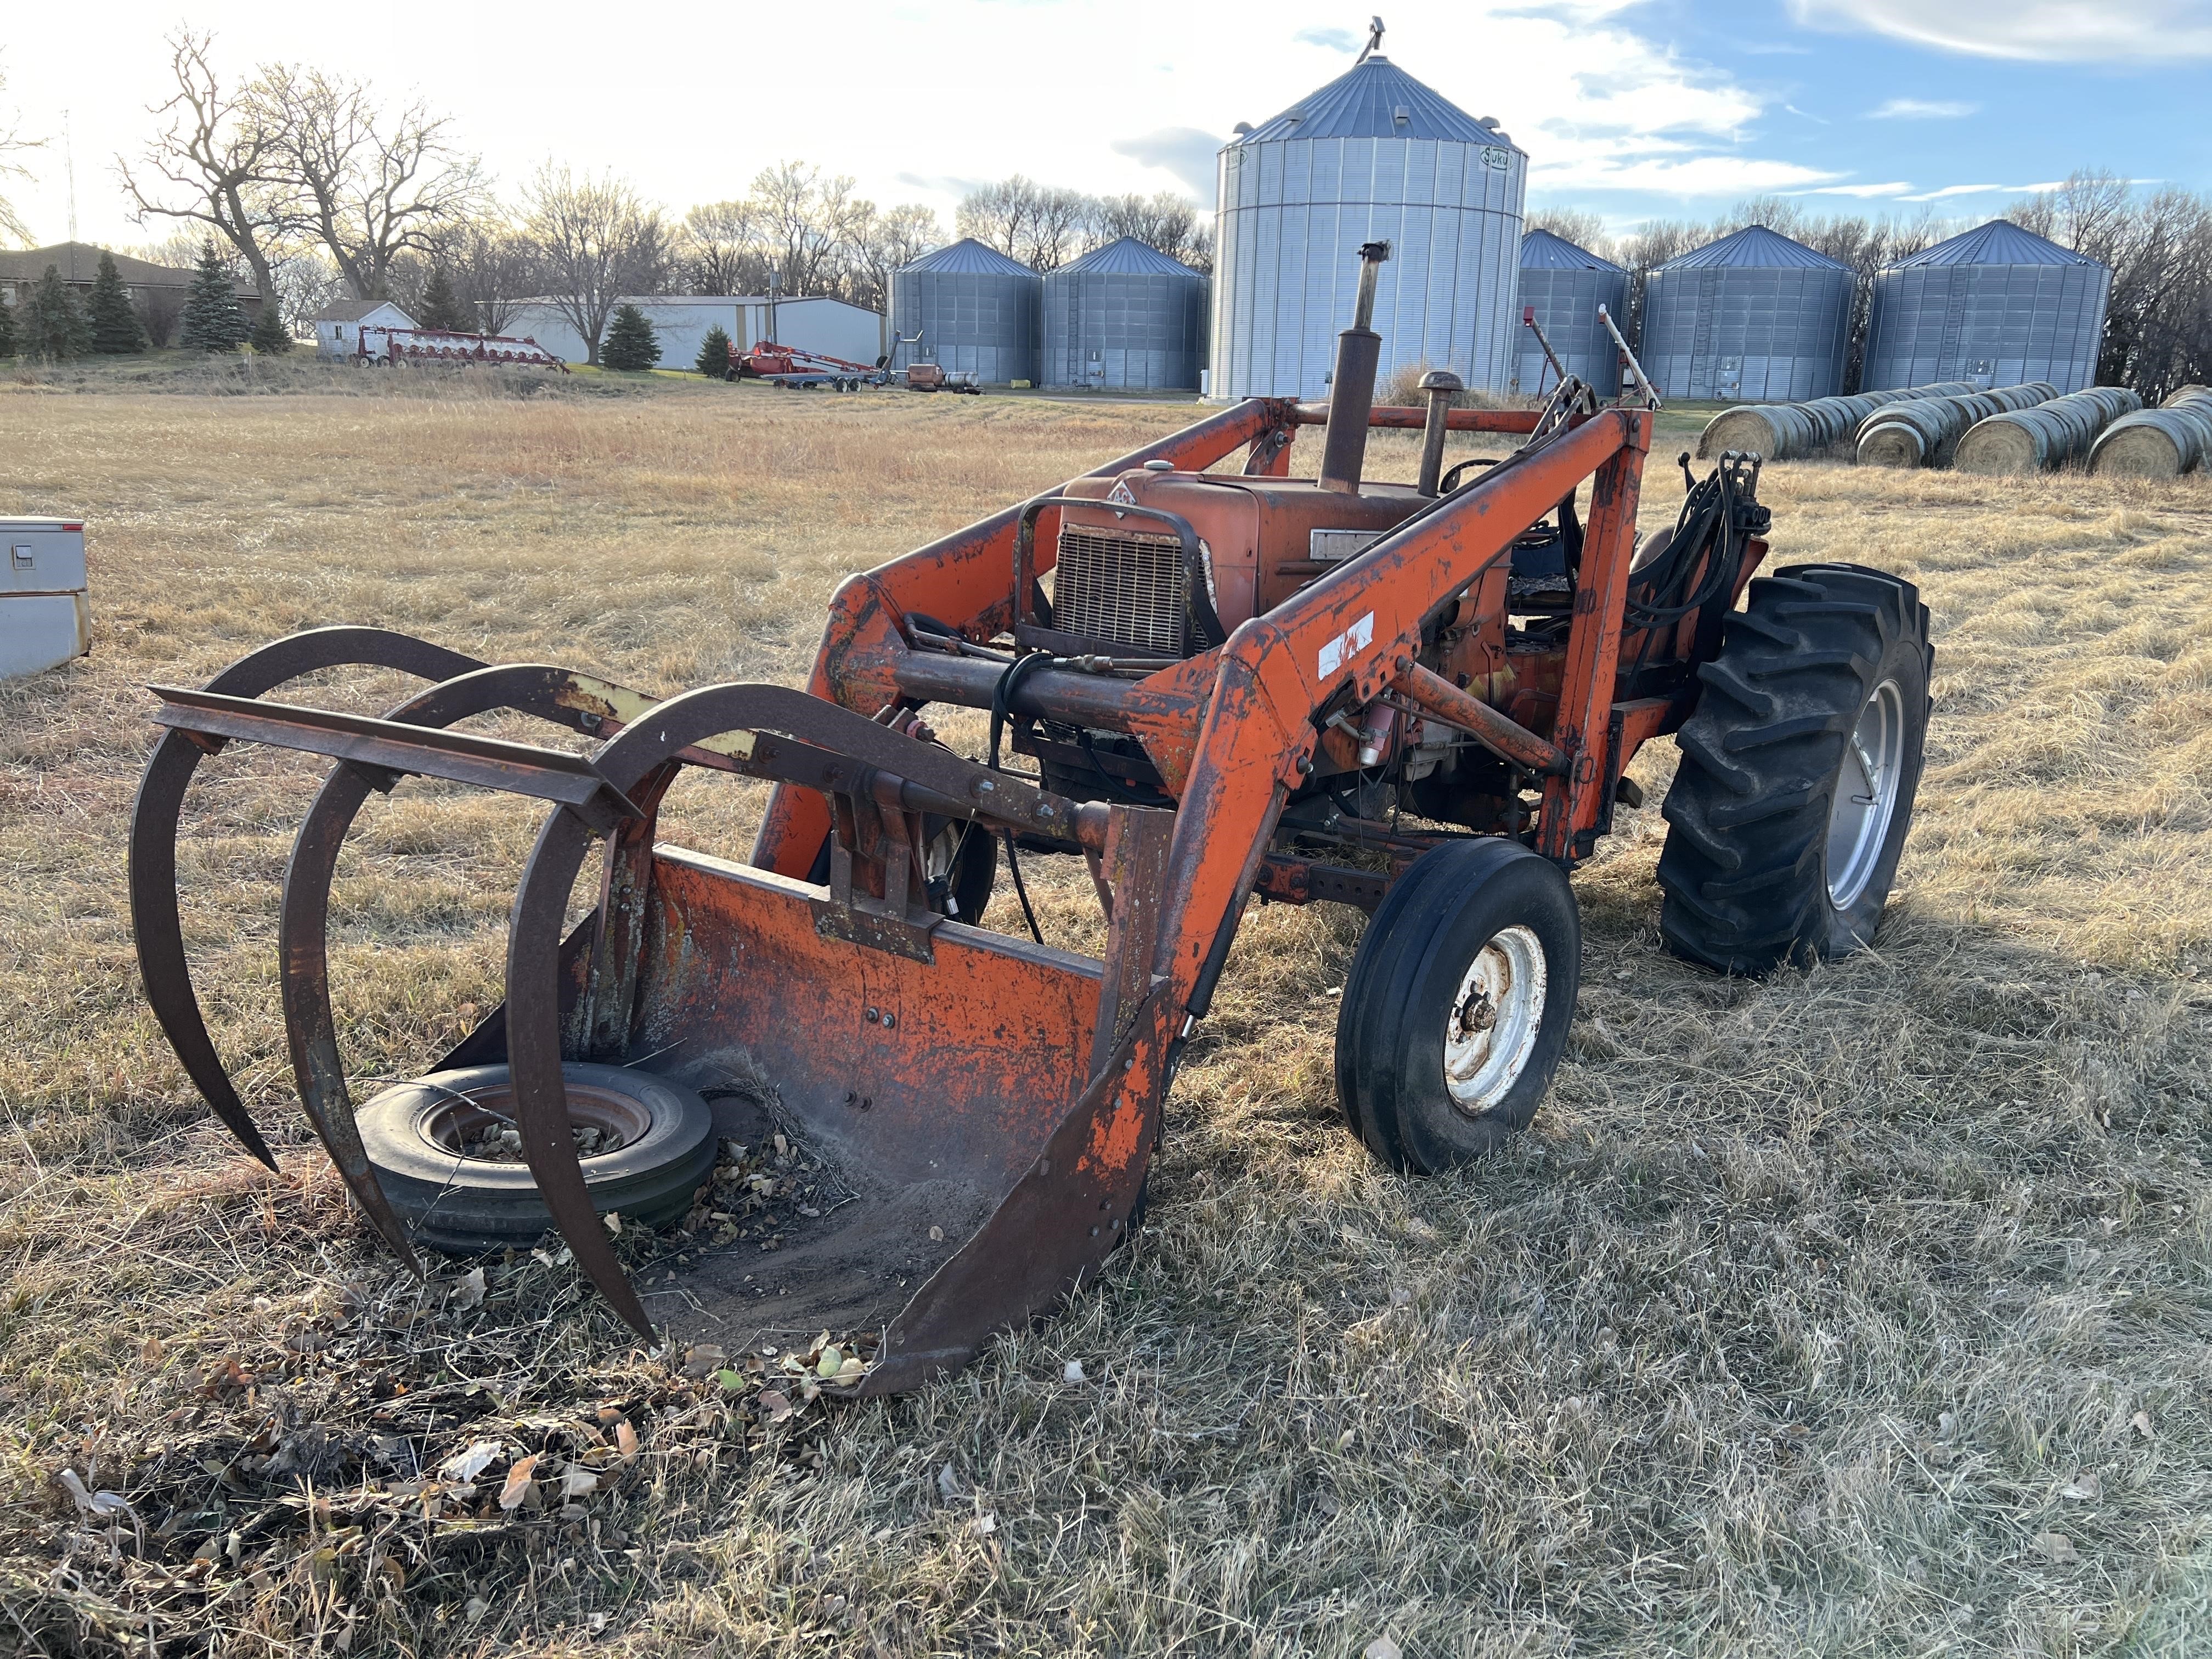 1964 Allis-Chalmers D17 Series IV 2WD Tractor BigIron Auctions